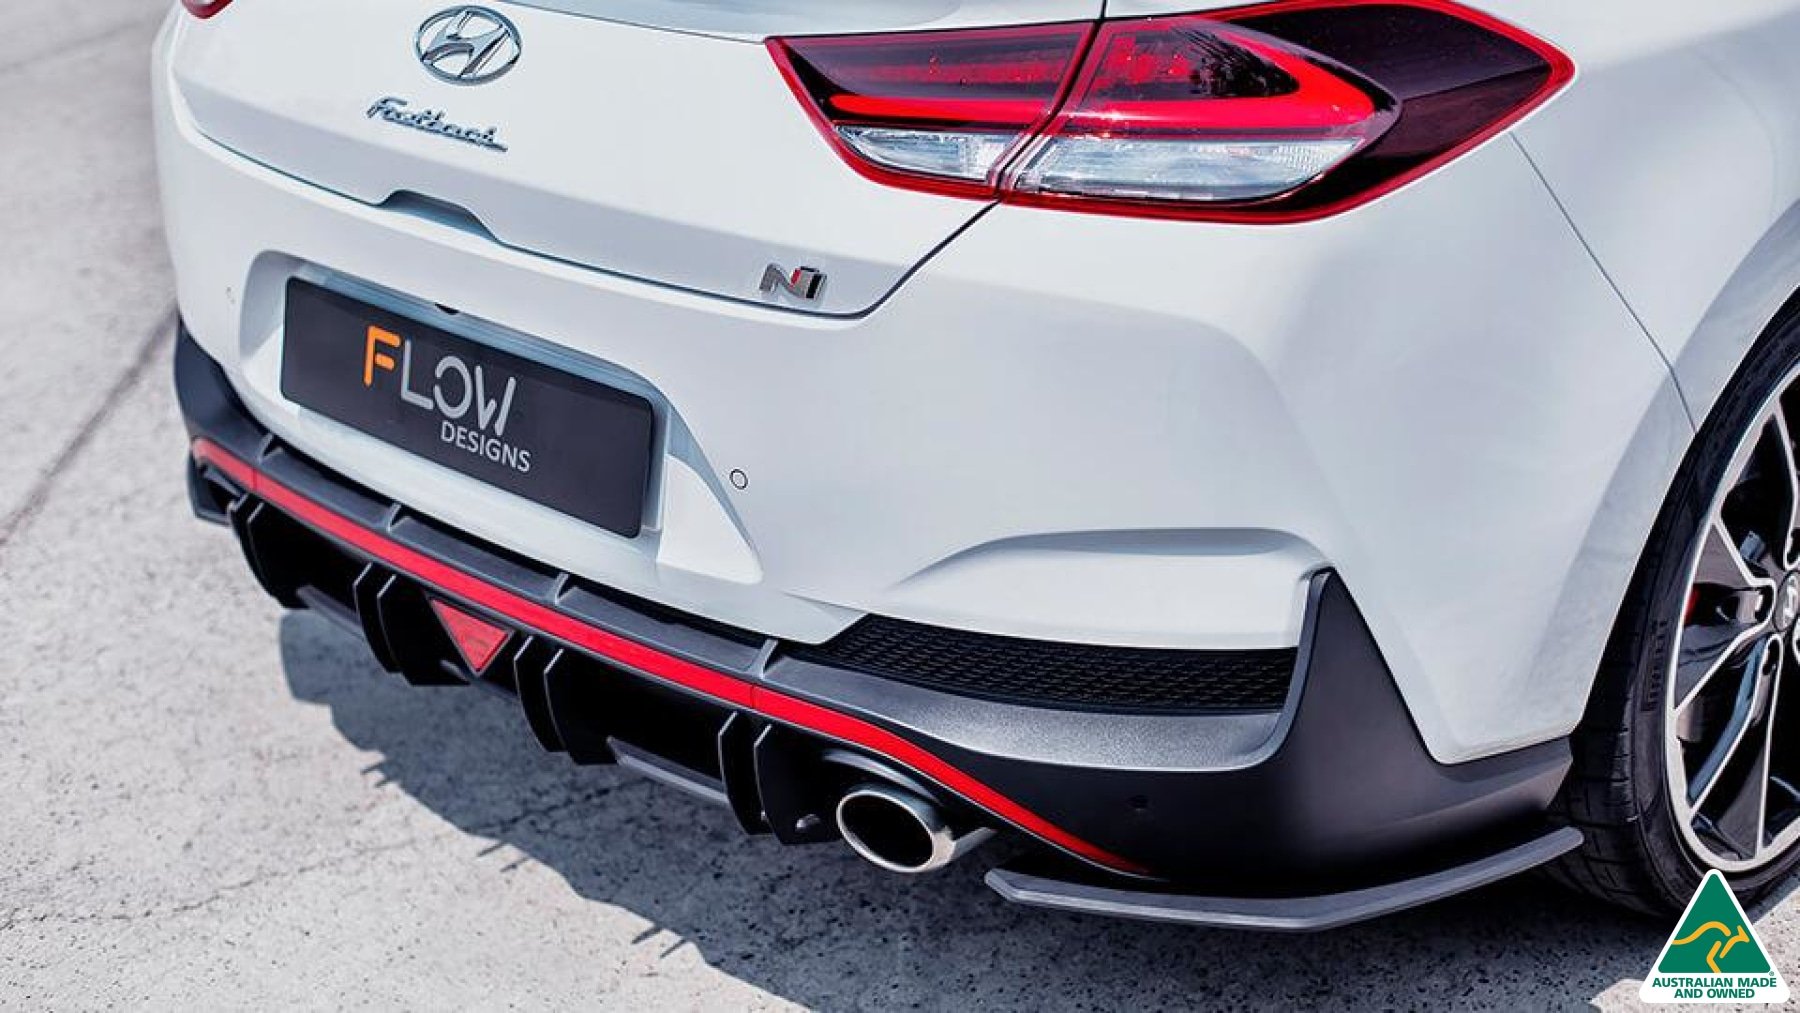 i30N Fastback PD Rear Pods/Spats (Pair) - MODE Auto Concepts